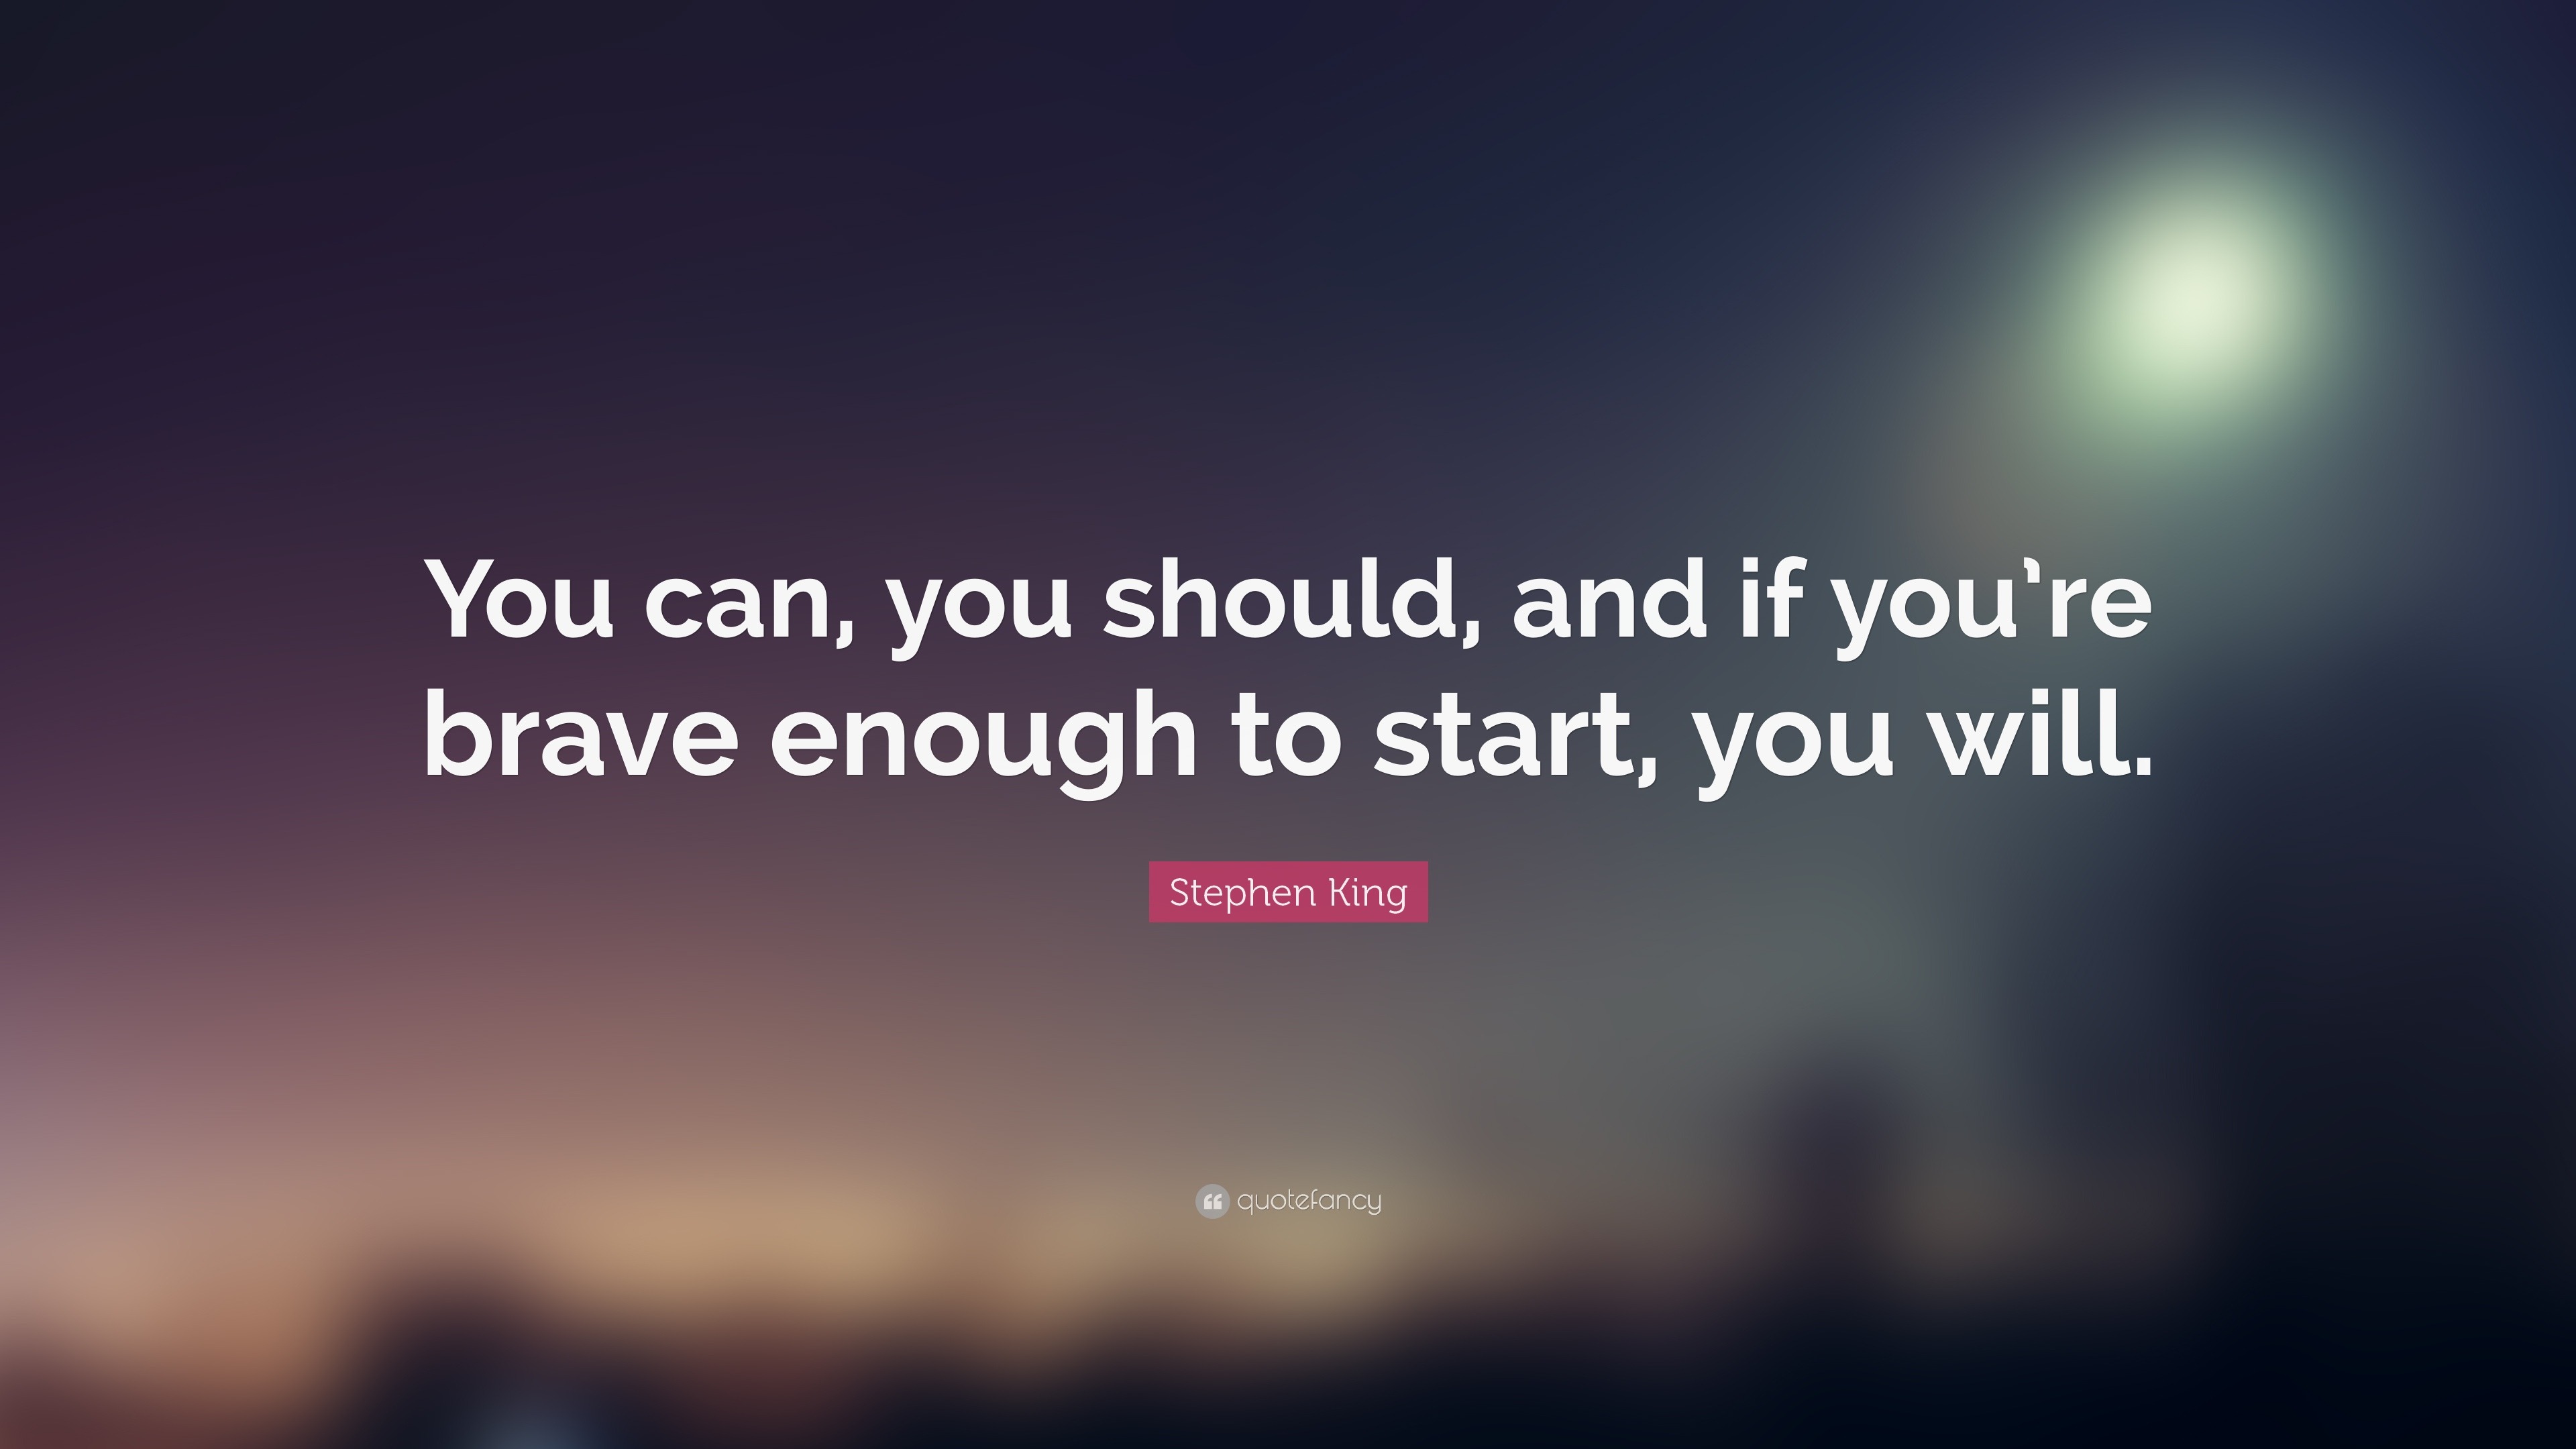 Stephen King Quote: “You can, you should, and if you’re brave enough to